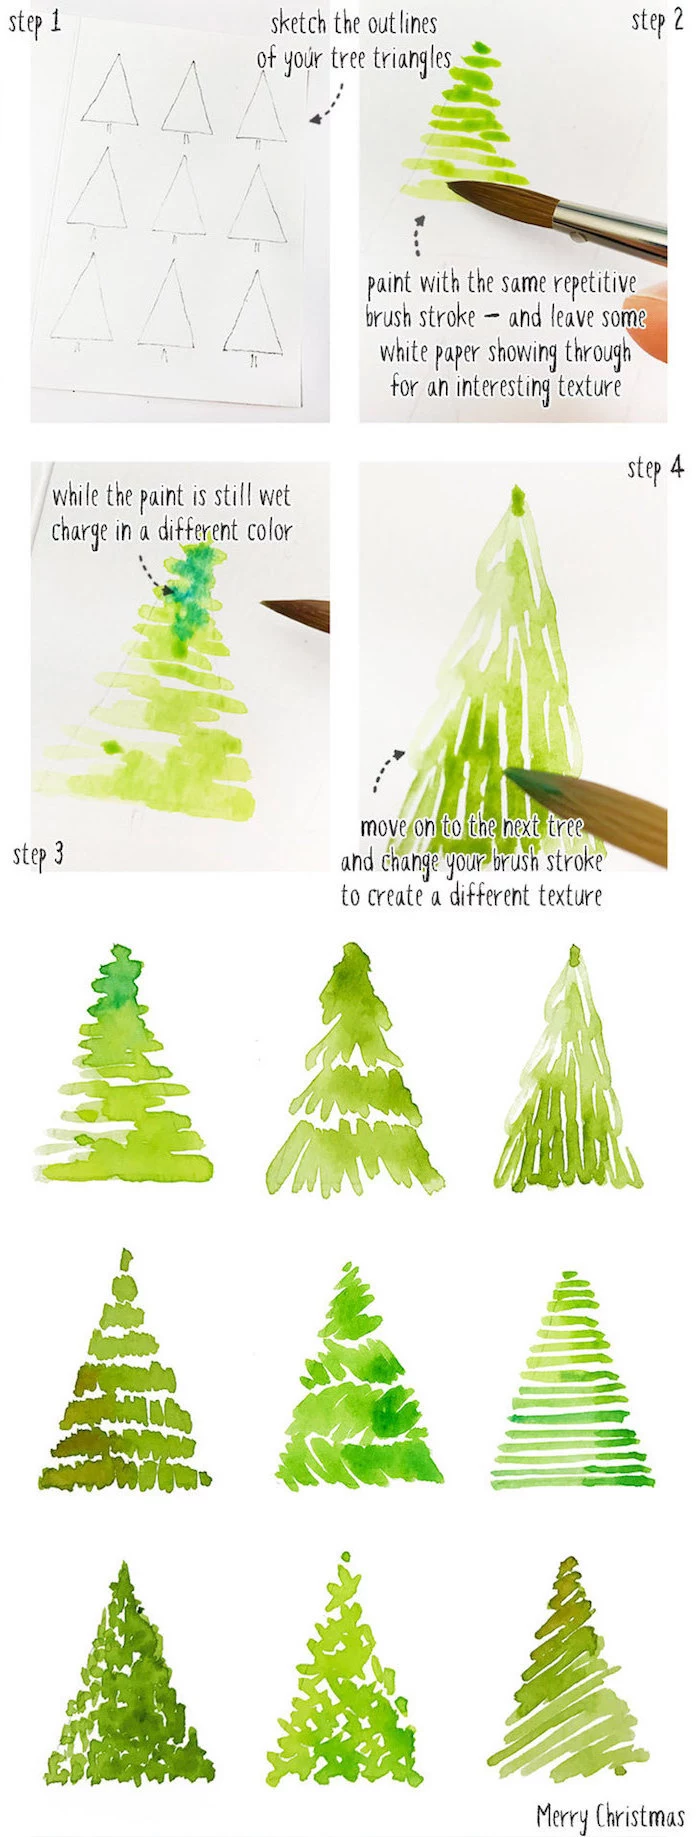 step by step diy tutorial, how to draw a christmas tree, different trees, drawn with watercolor, watercolor ideas